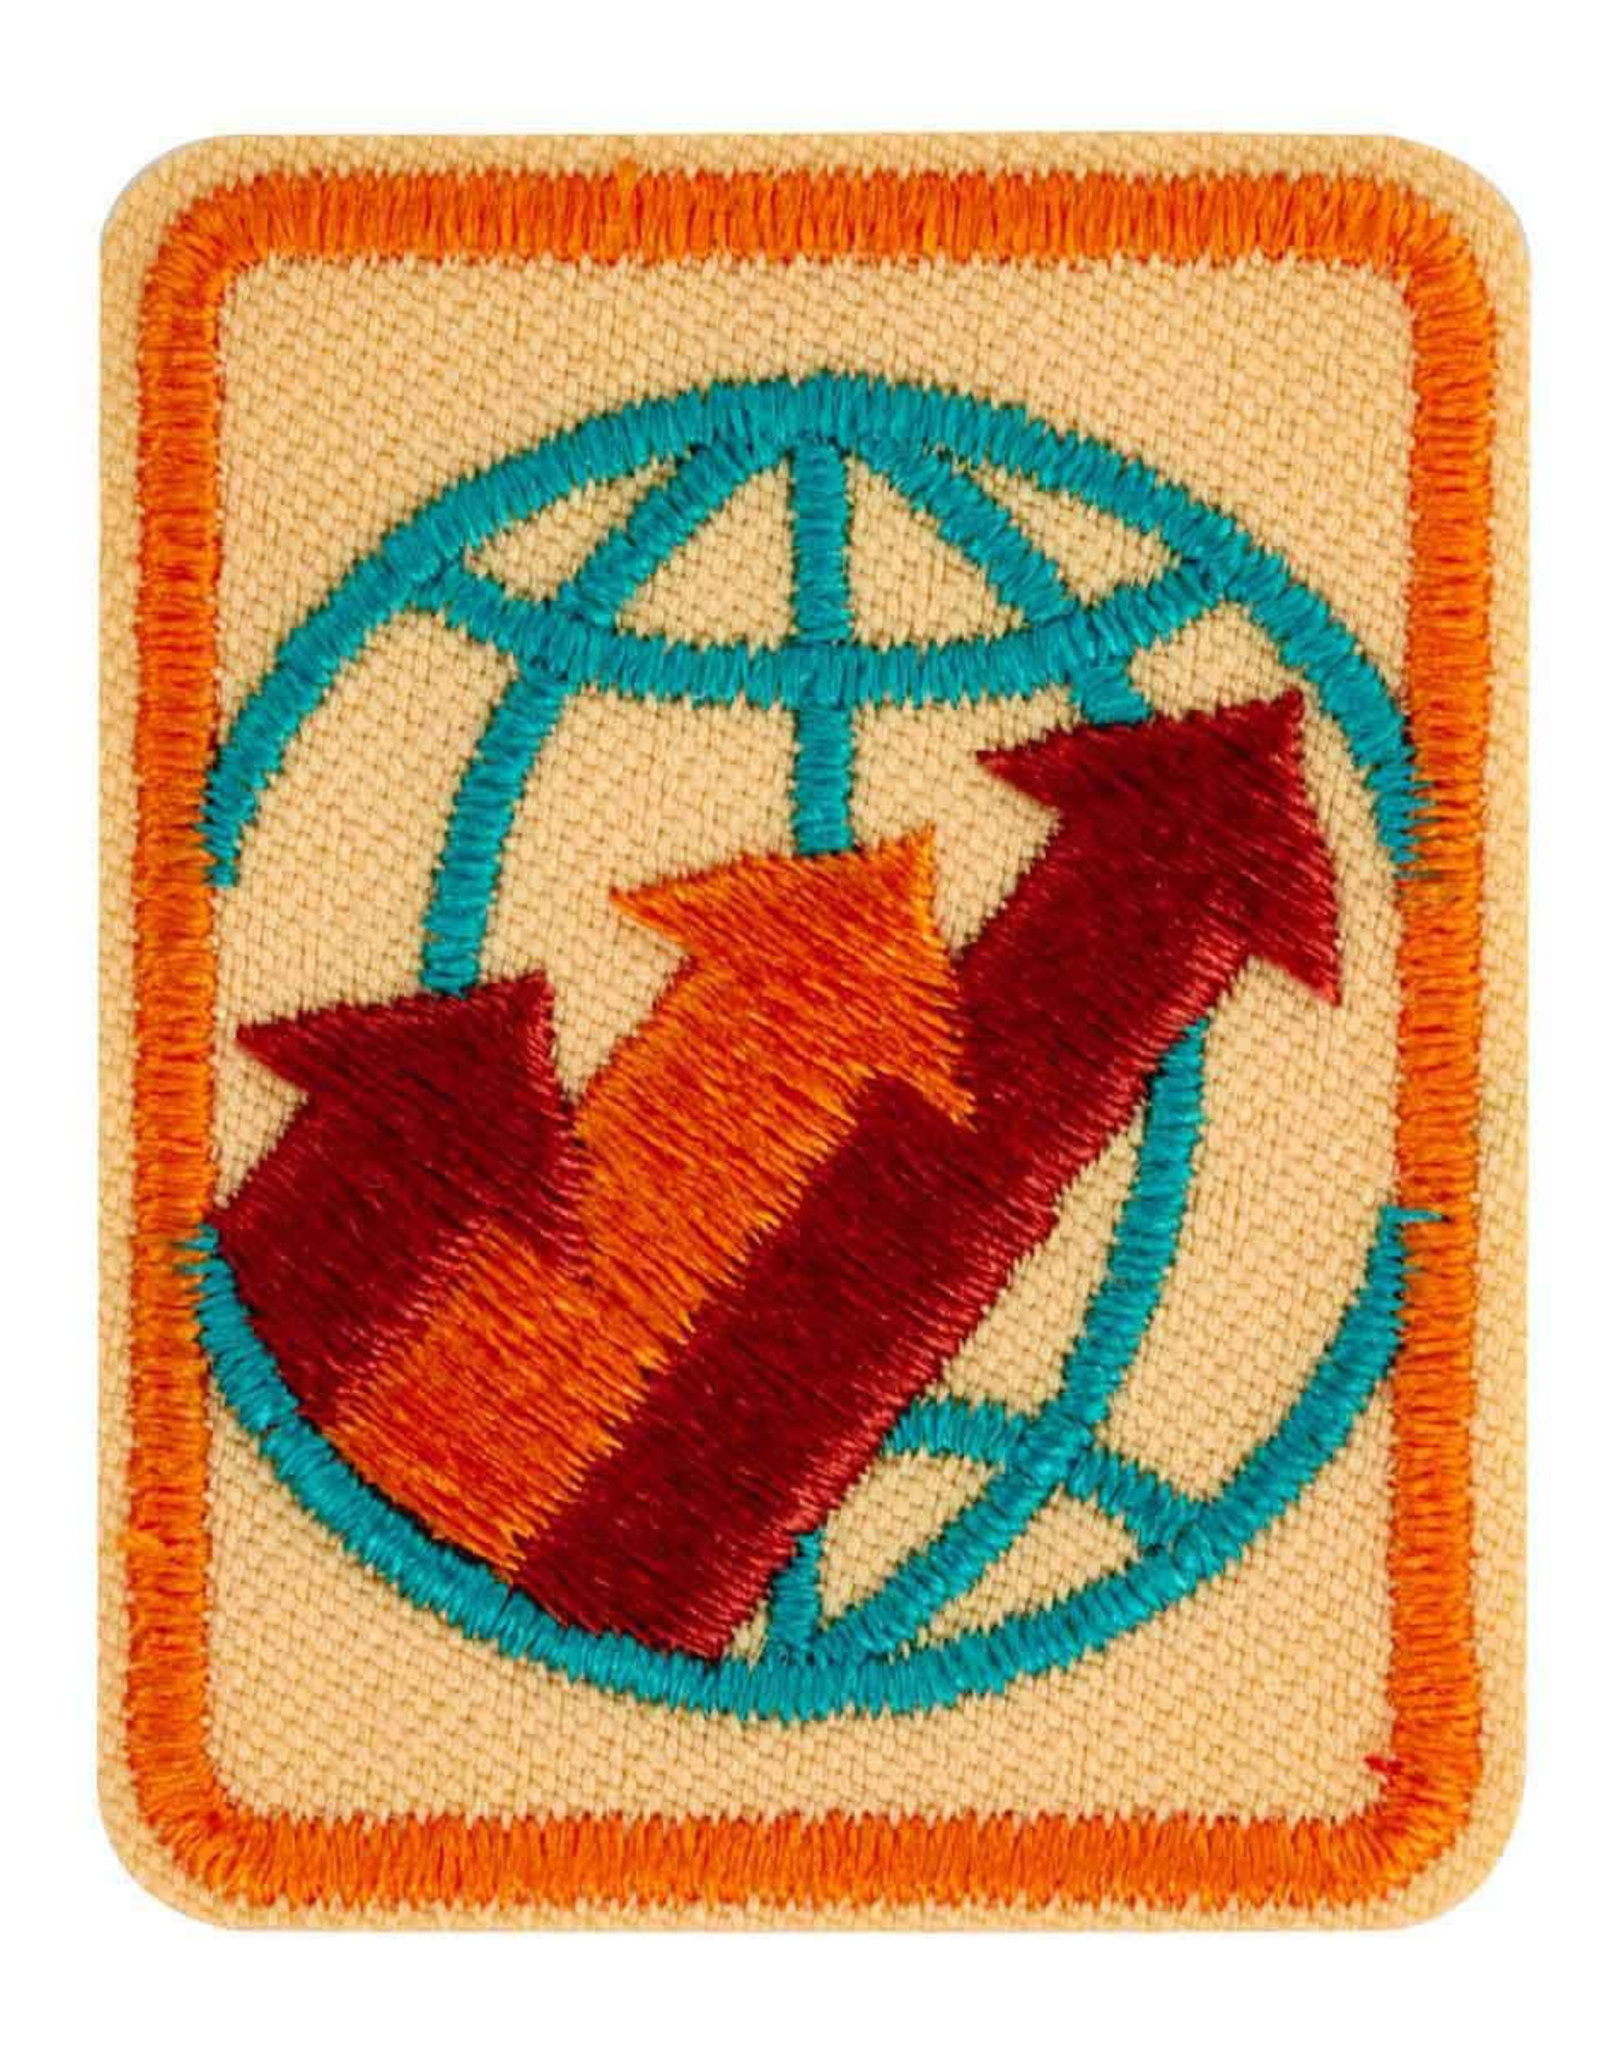 GIRL SCOUTS OF THE USA Senior Global Action Award Year 2  Badge